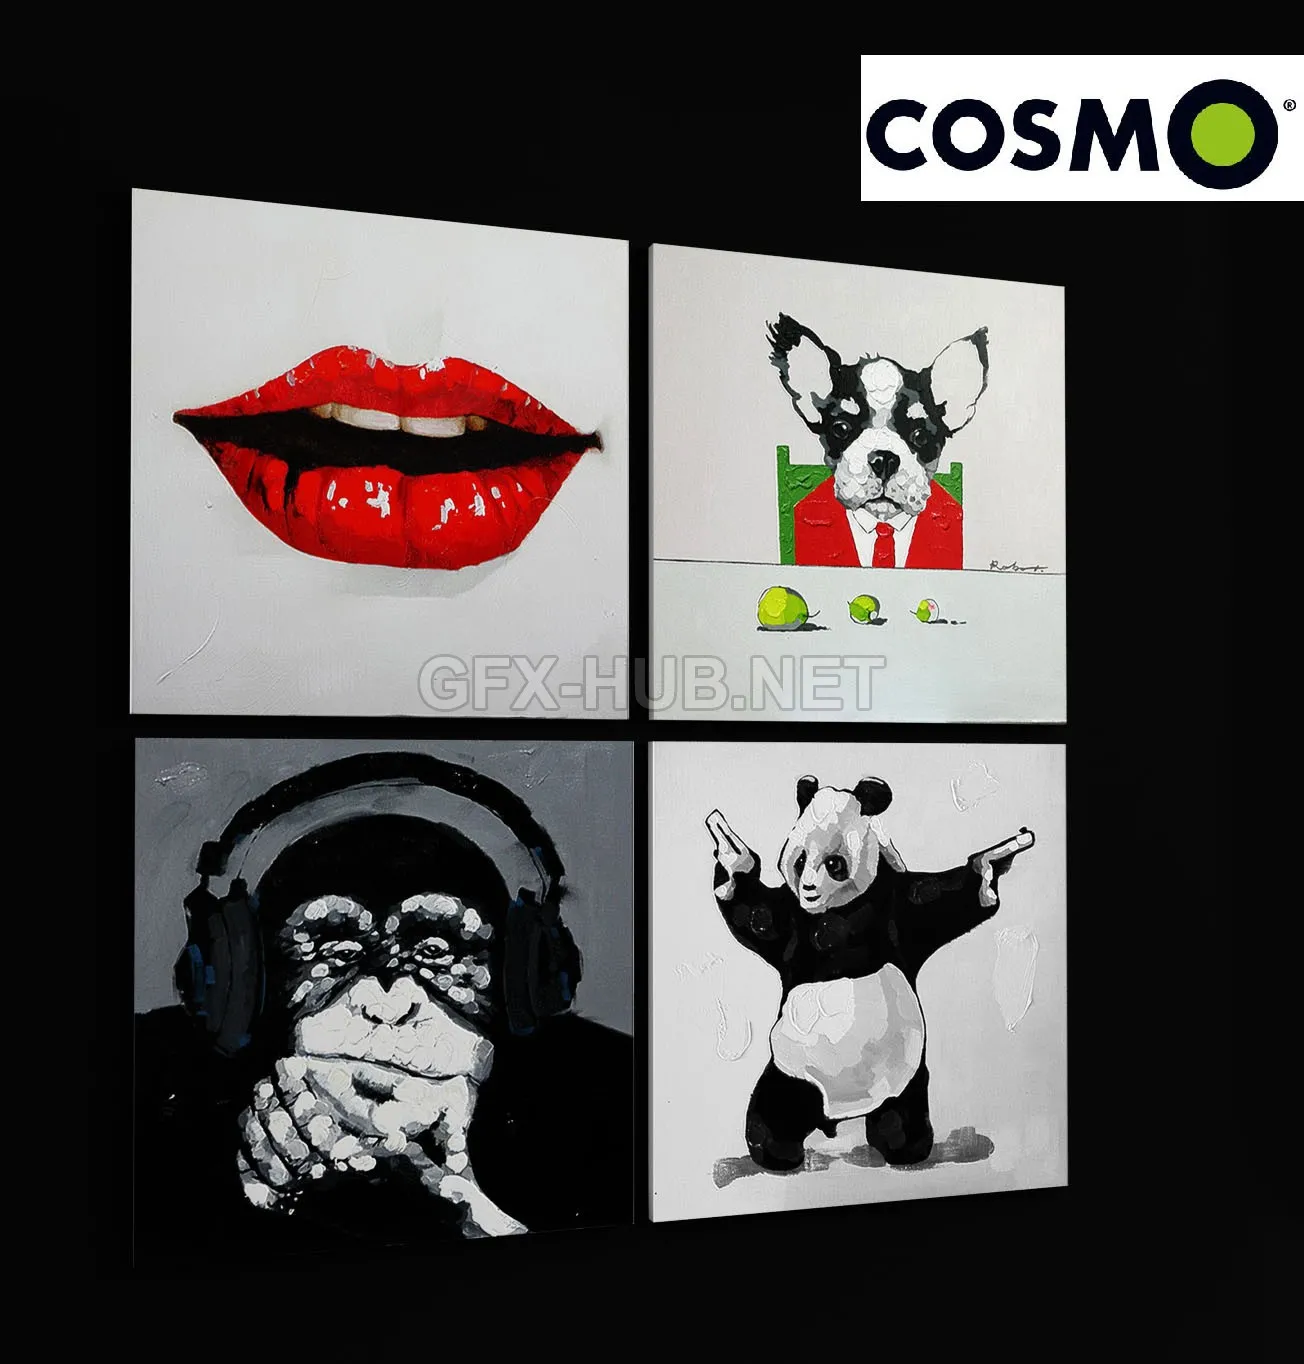 FURNITURE 3D MODELS – Paintings Cosmo